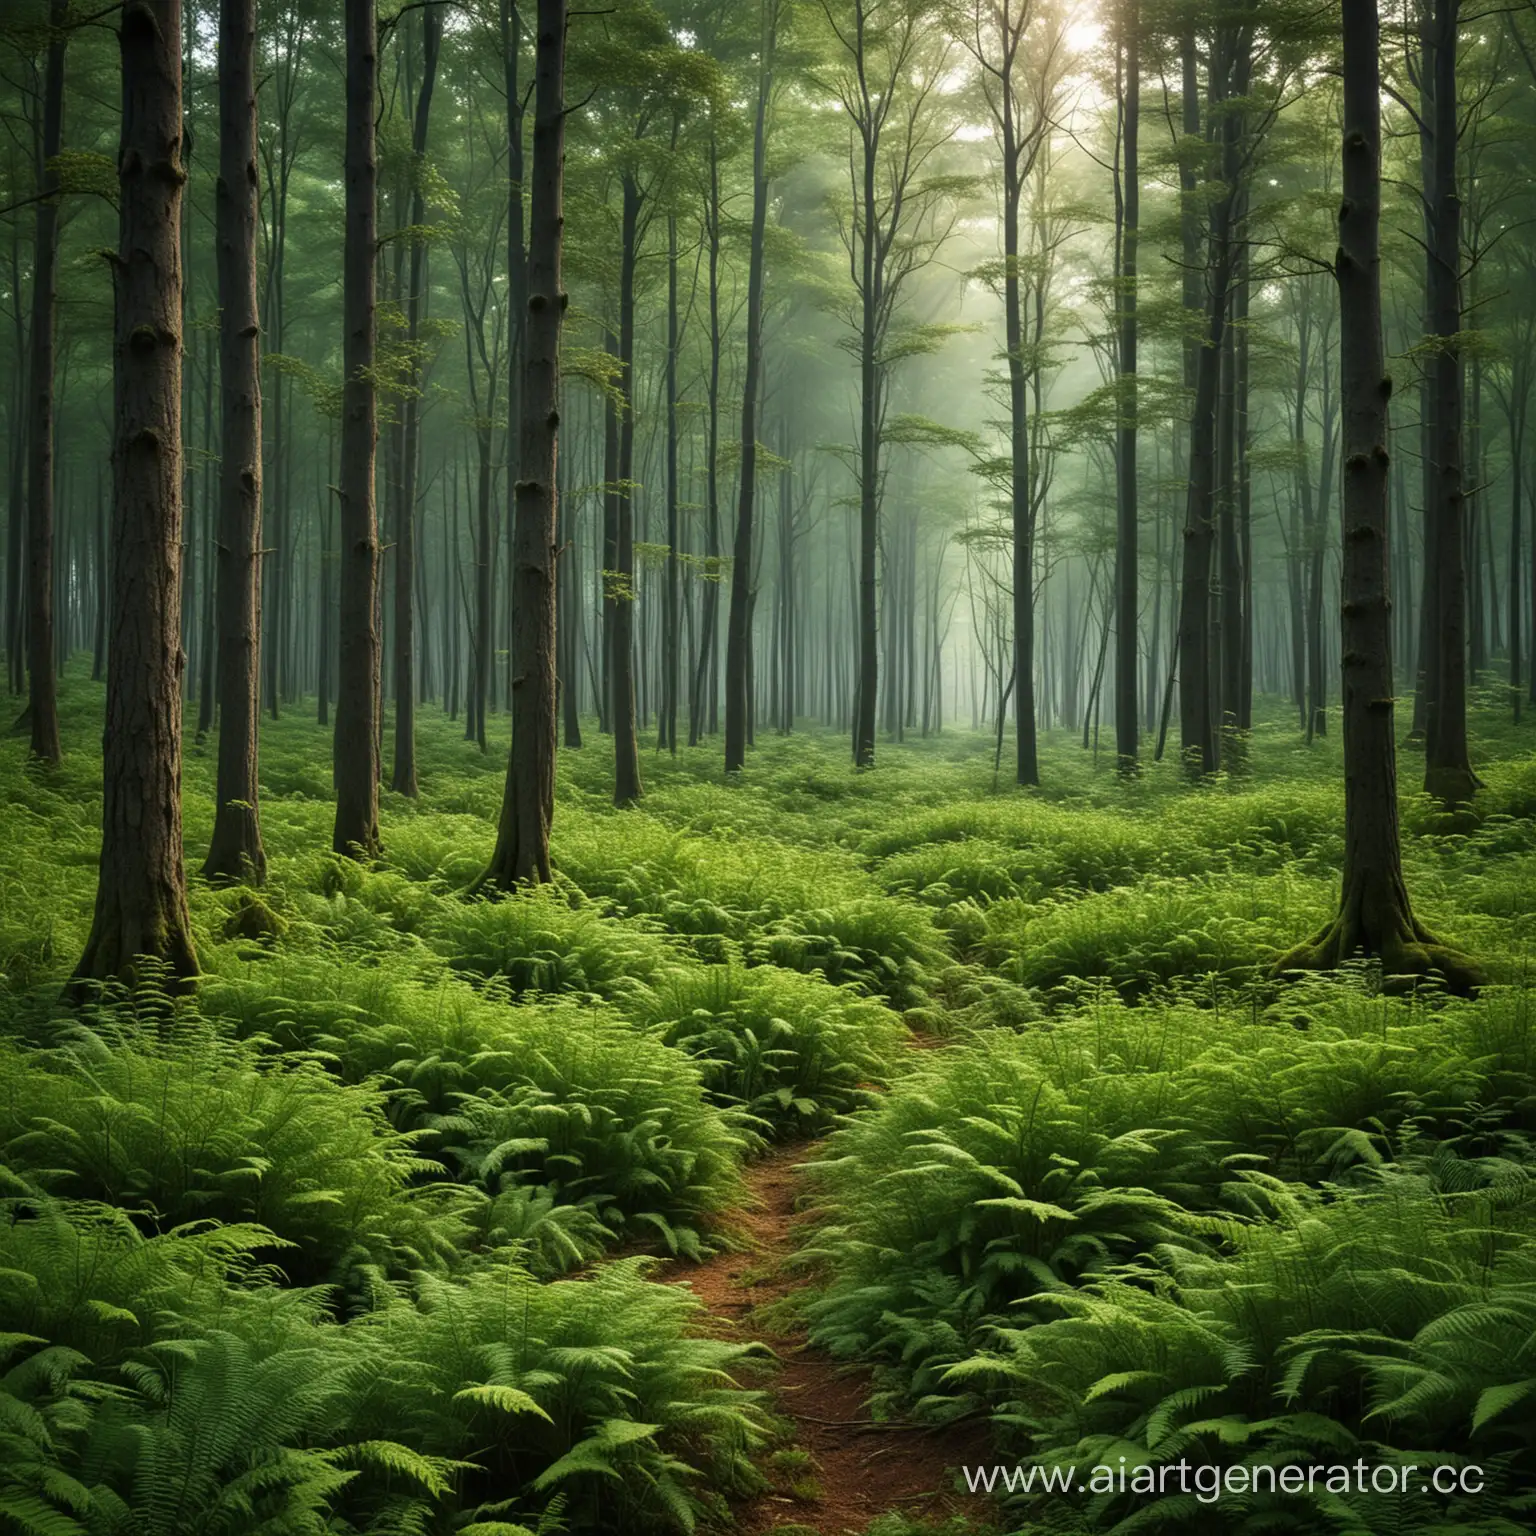 Enchanting-Forest-Landscape-with-Majestic-Trees-and-Sunlight-Filtering-Through-Canopy